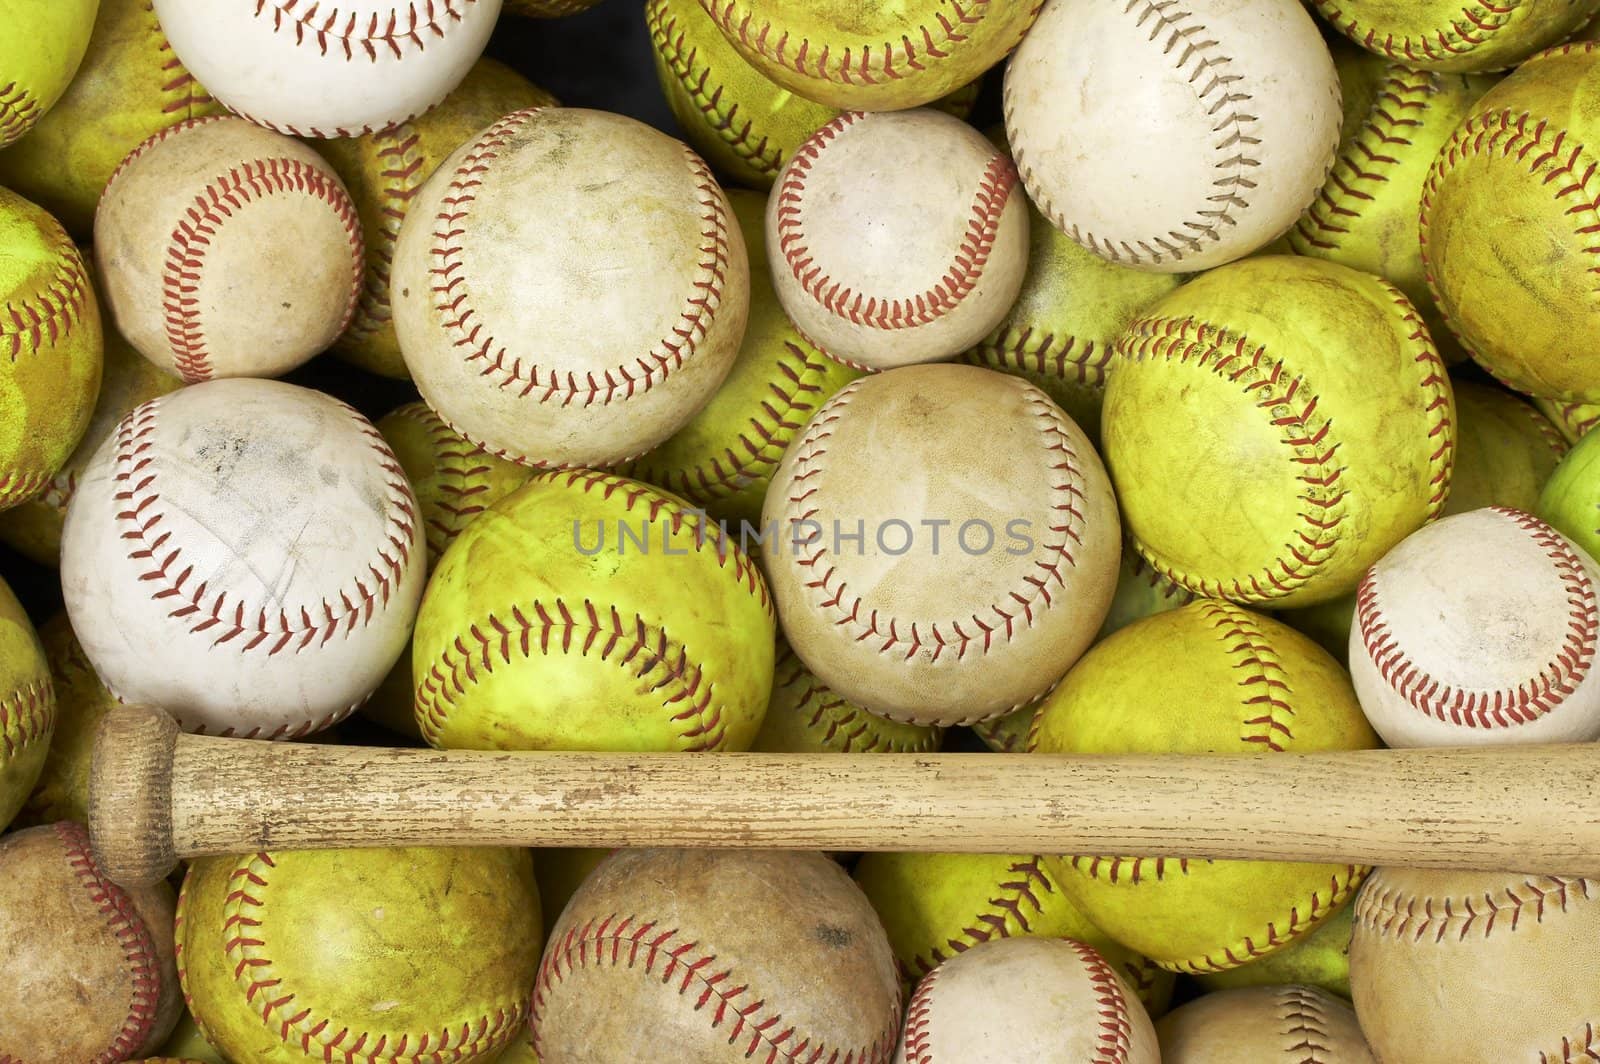 a picture of baseballs and softballs